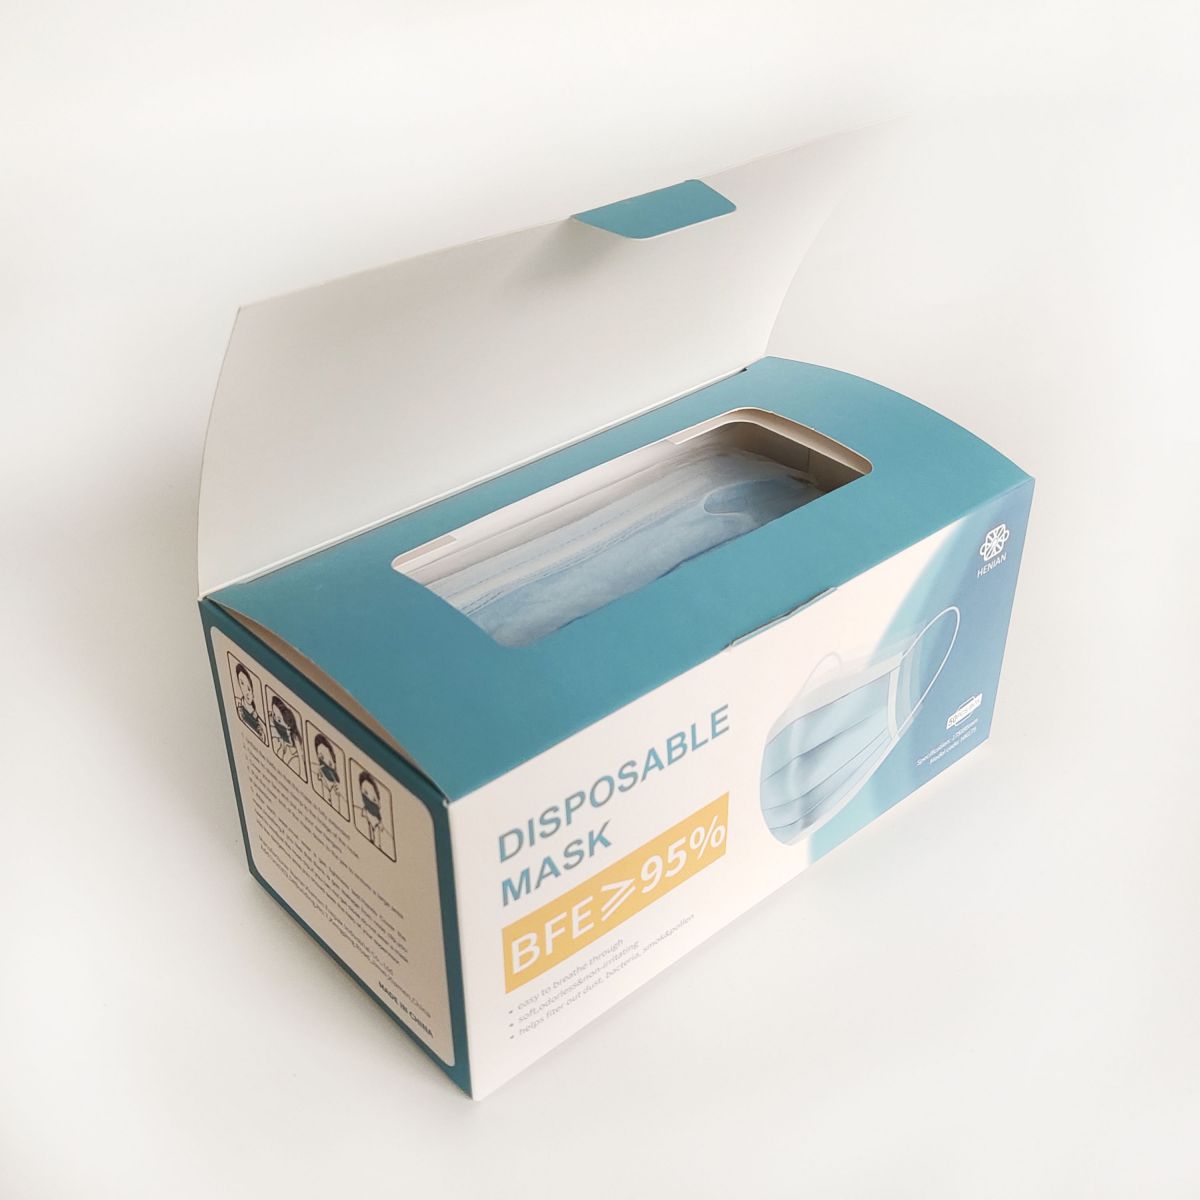 Hot Sale Foldable Empty Paper Box for 3ply Surgical Face Mask Packaging